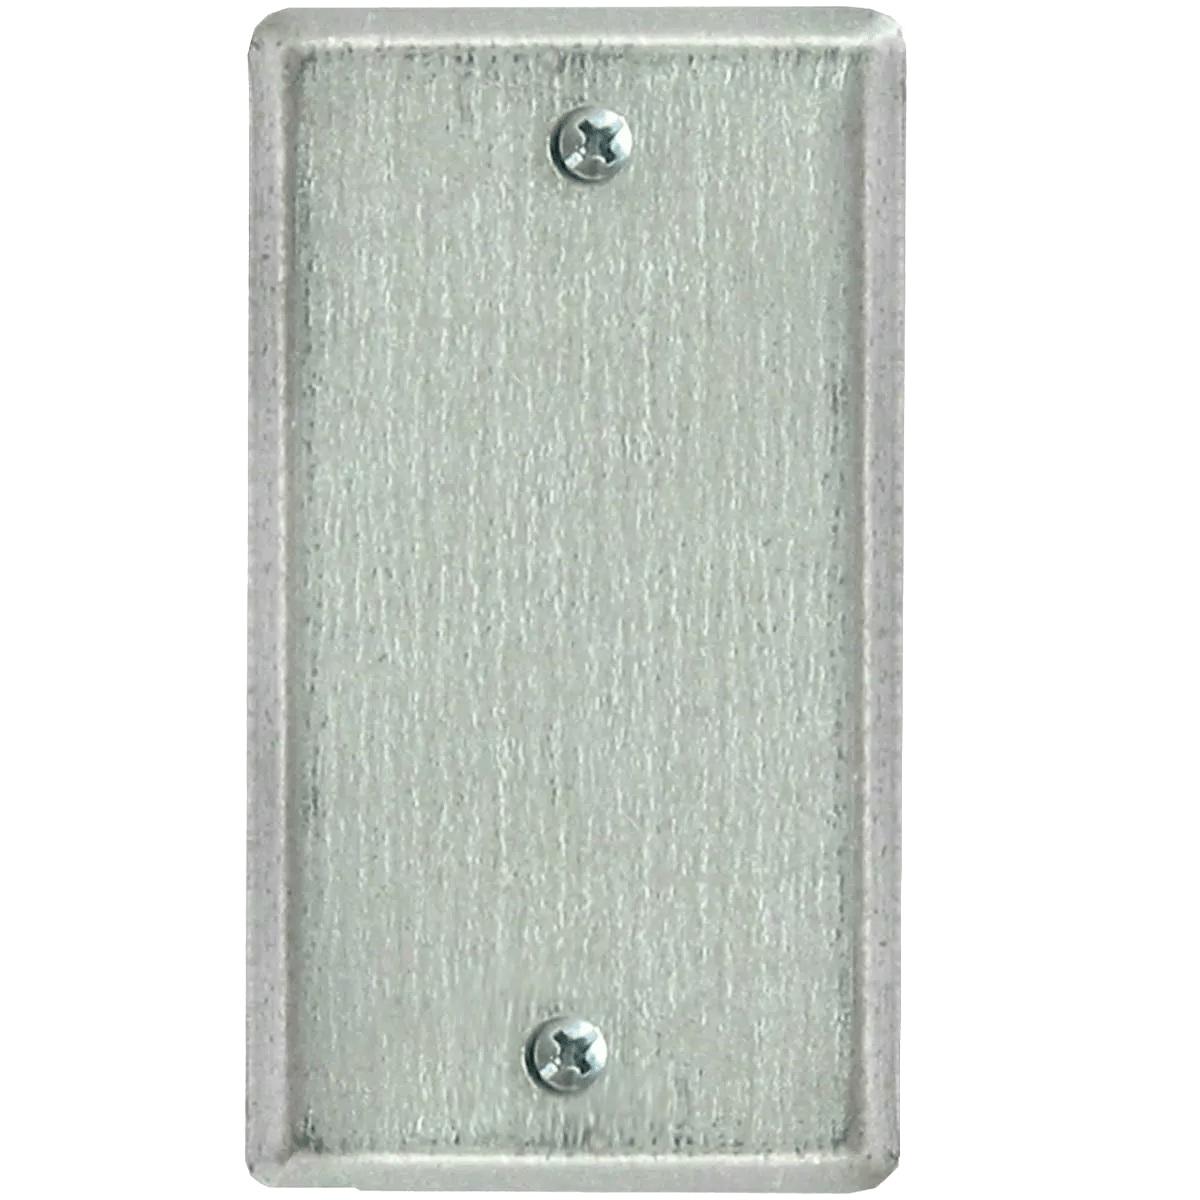 4" x 2-1/8" Blank Electrical Utility Box Cover